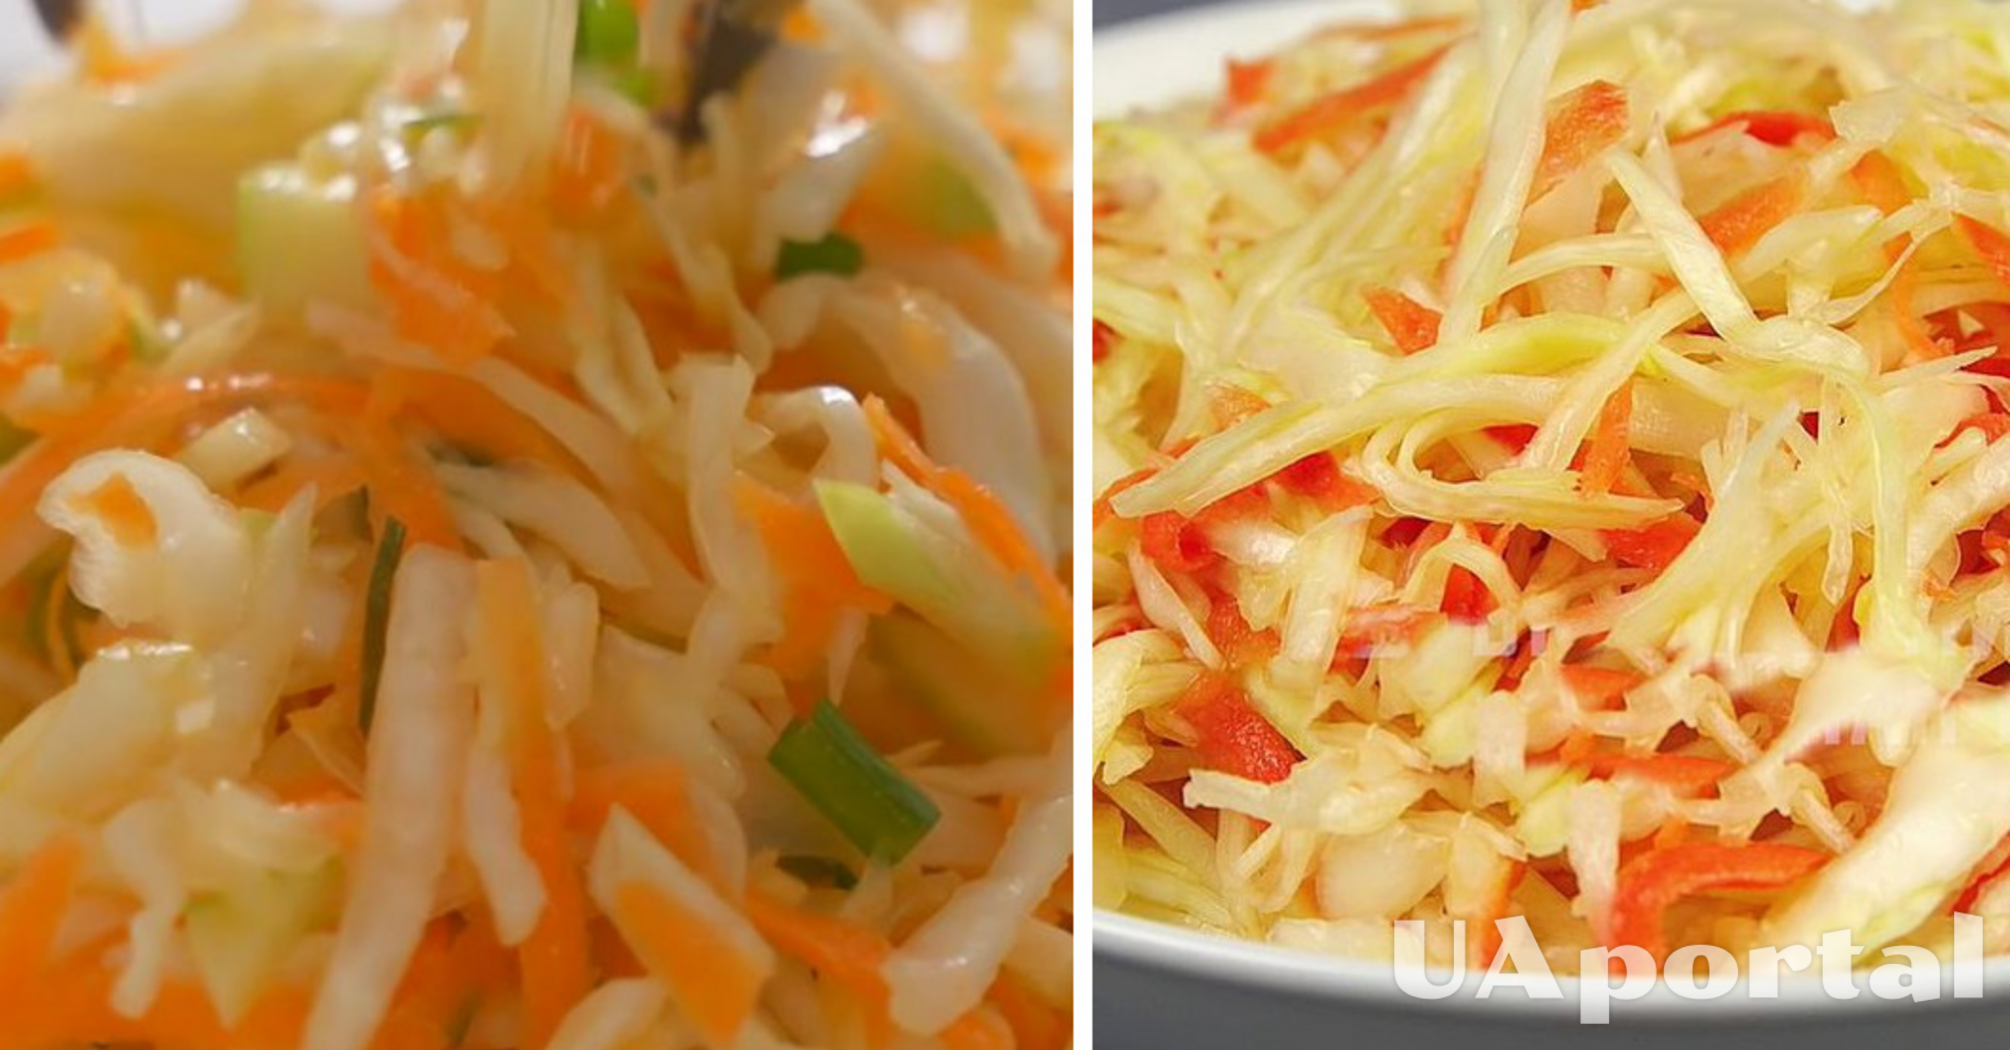 Spicy and healthy: a recipe for spicy cabbage salad